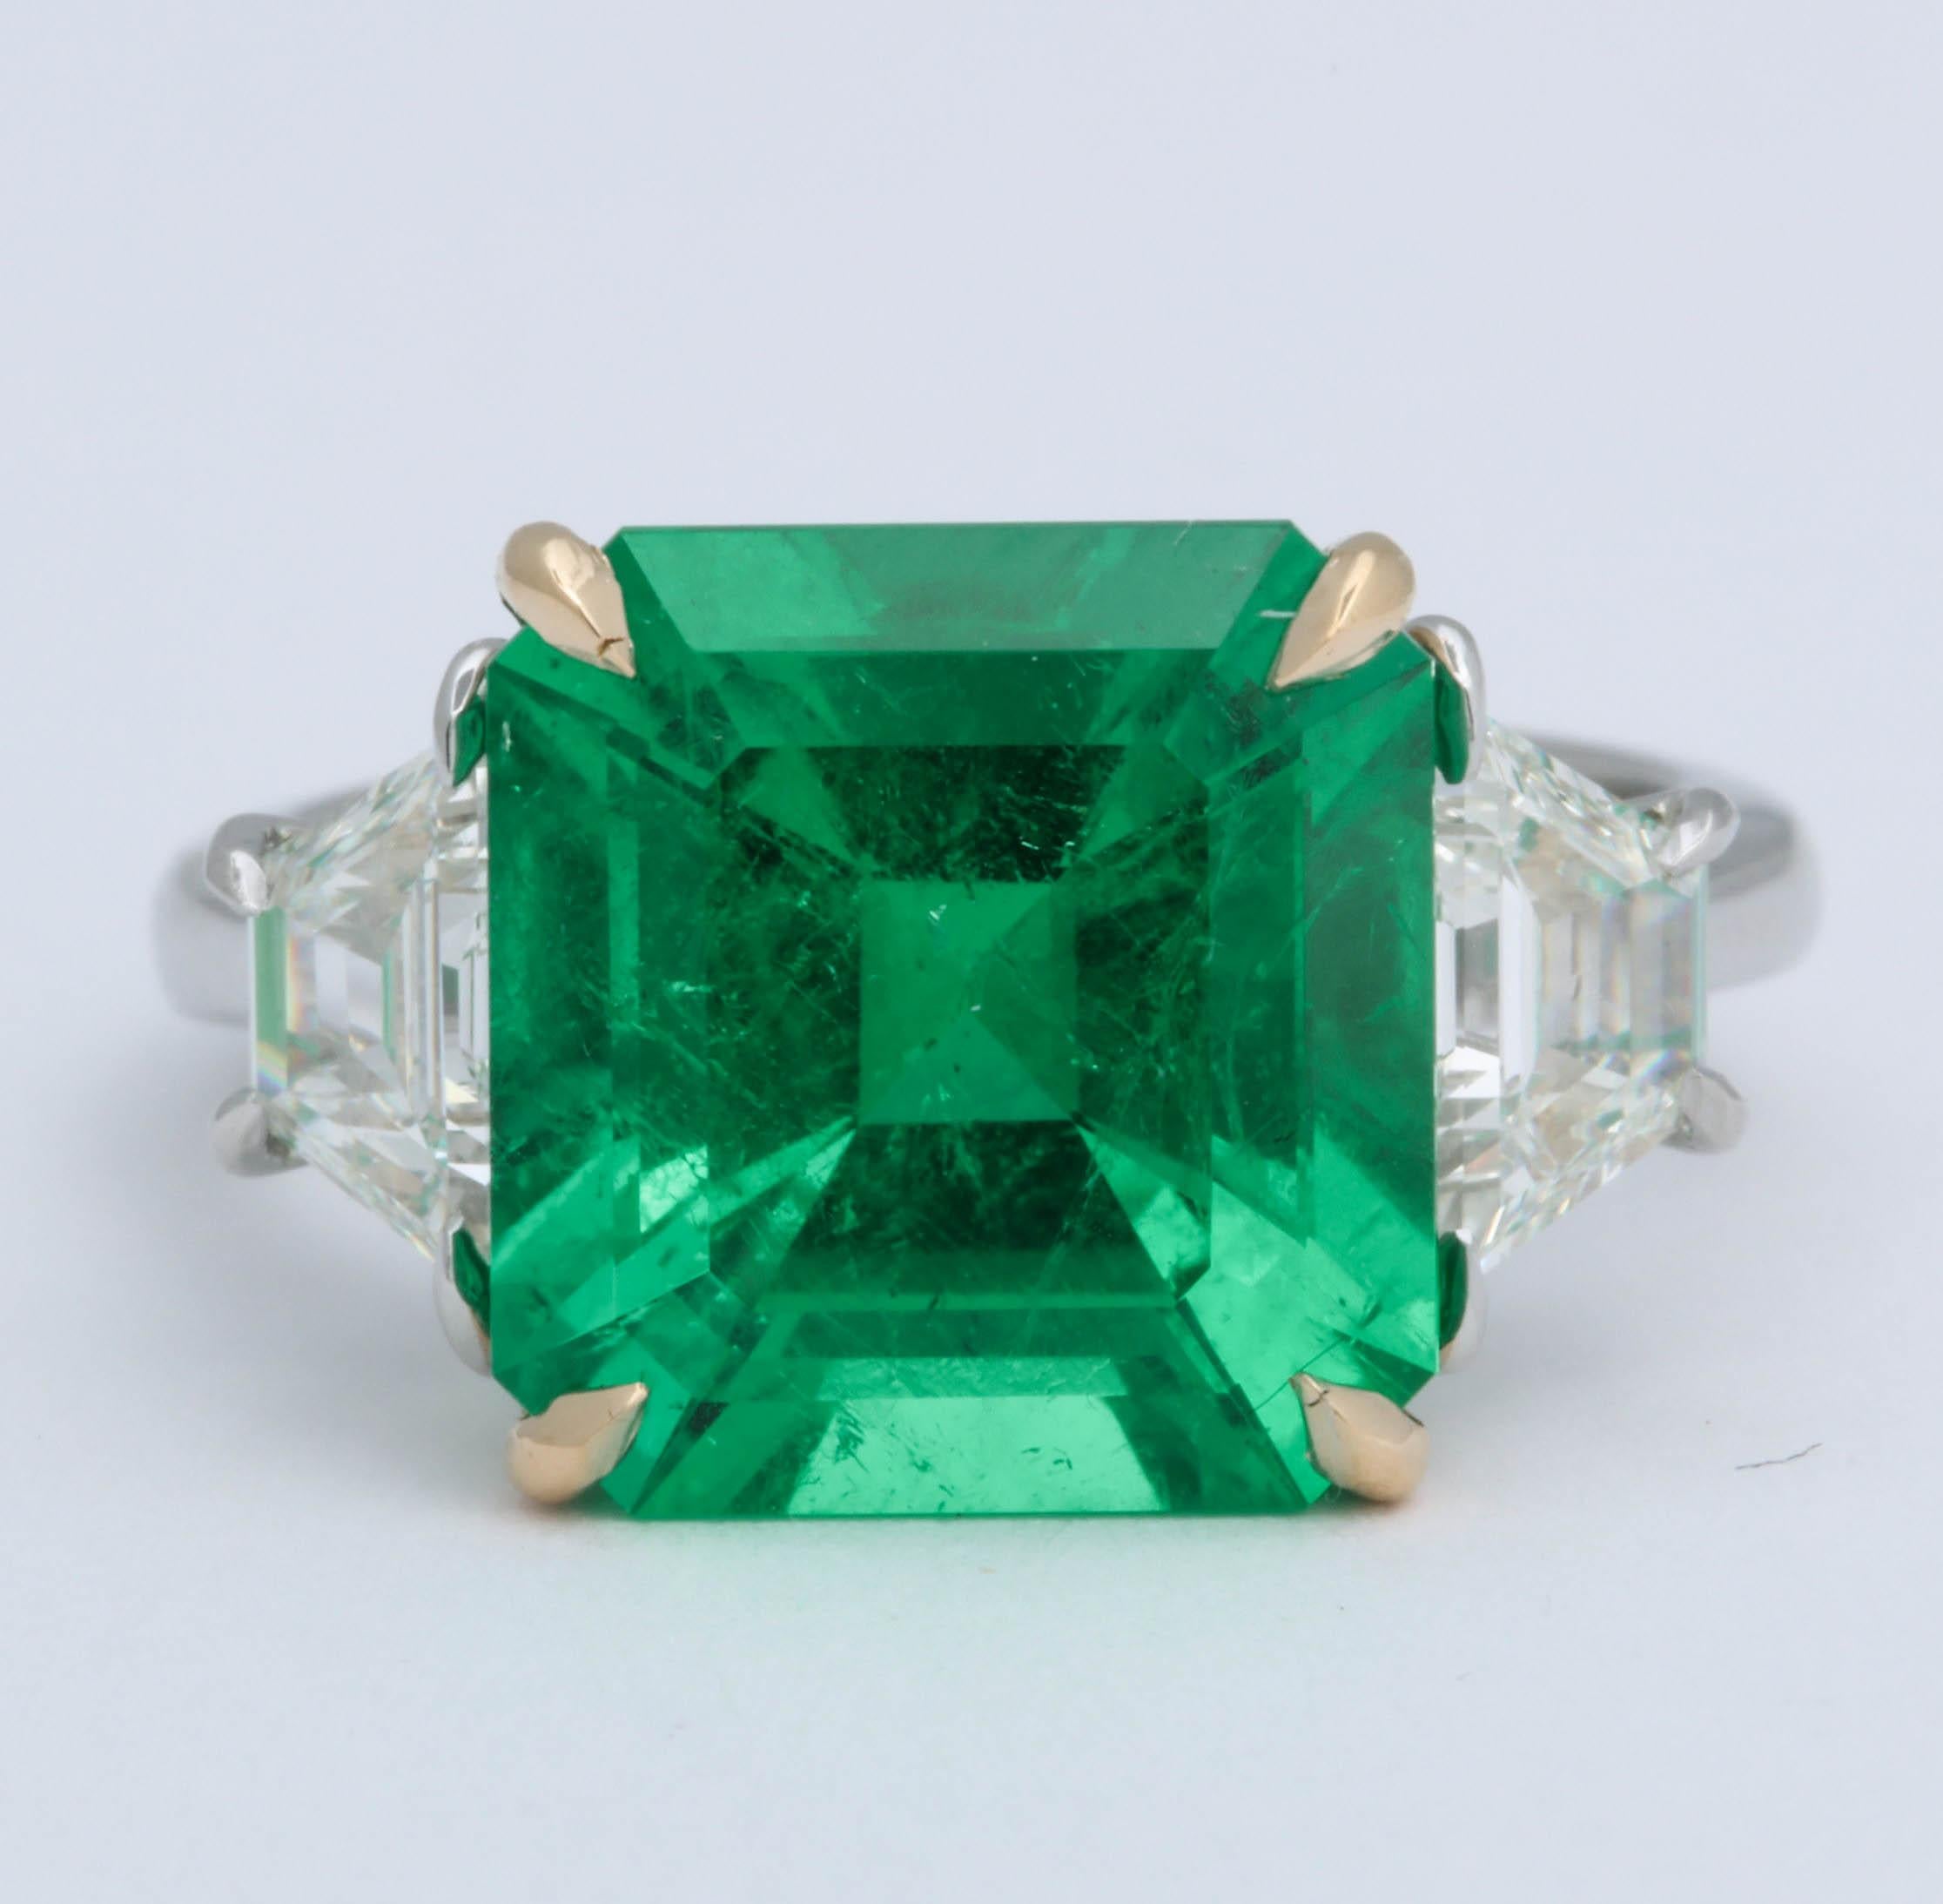 A beautiful emerald with Muzo vivid green incredible color.

Emeralds from the Muzo mine in Colombia are very rare and have an exceptional green color.

5.32 carat certified Vivid Green Muzo Colombian emerald. 

1.21 carats of diamonds.

Set in